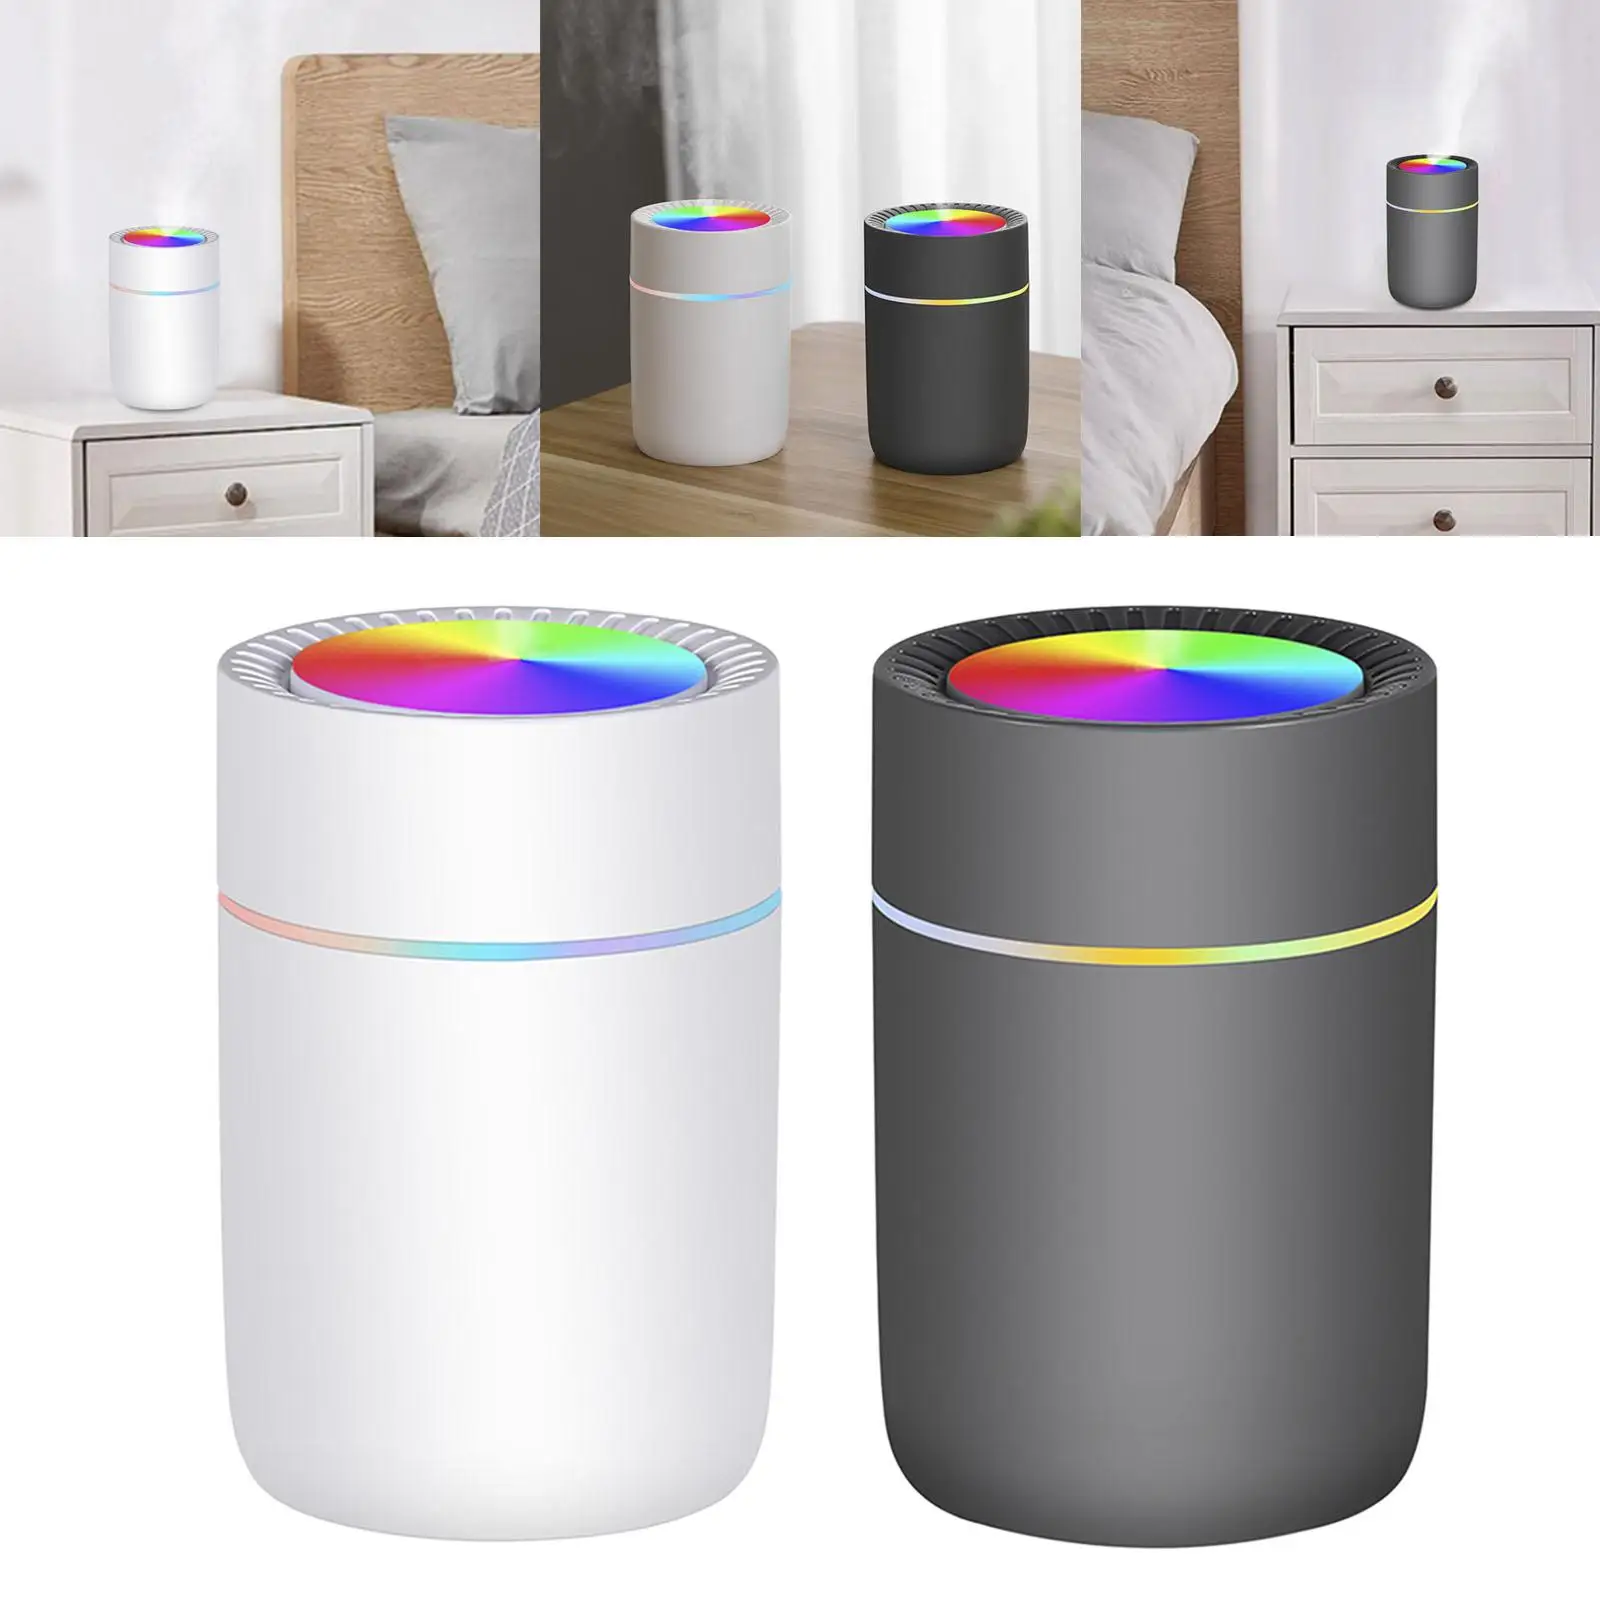 Mist Two Spray Modes with Colorful Light Low Noise Fogger Diffuser 350ml Capacity Air for Desk Office Bedroom